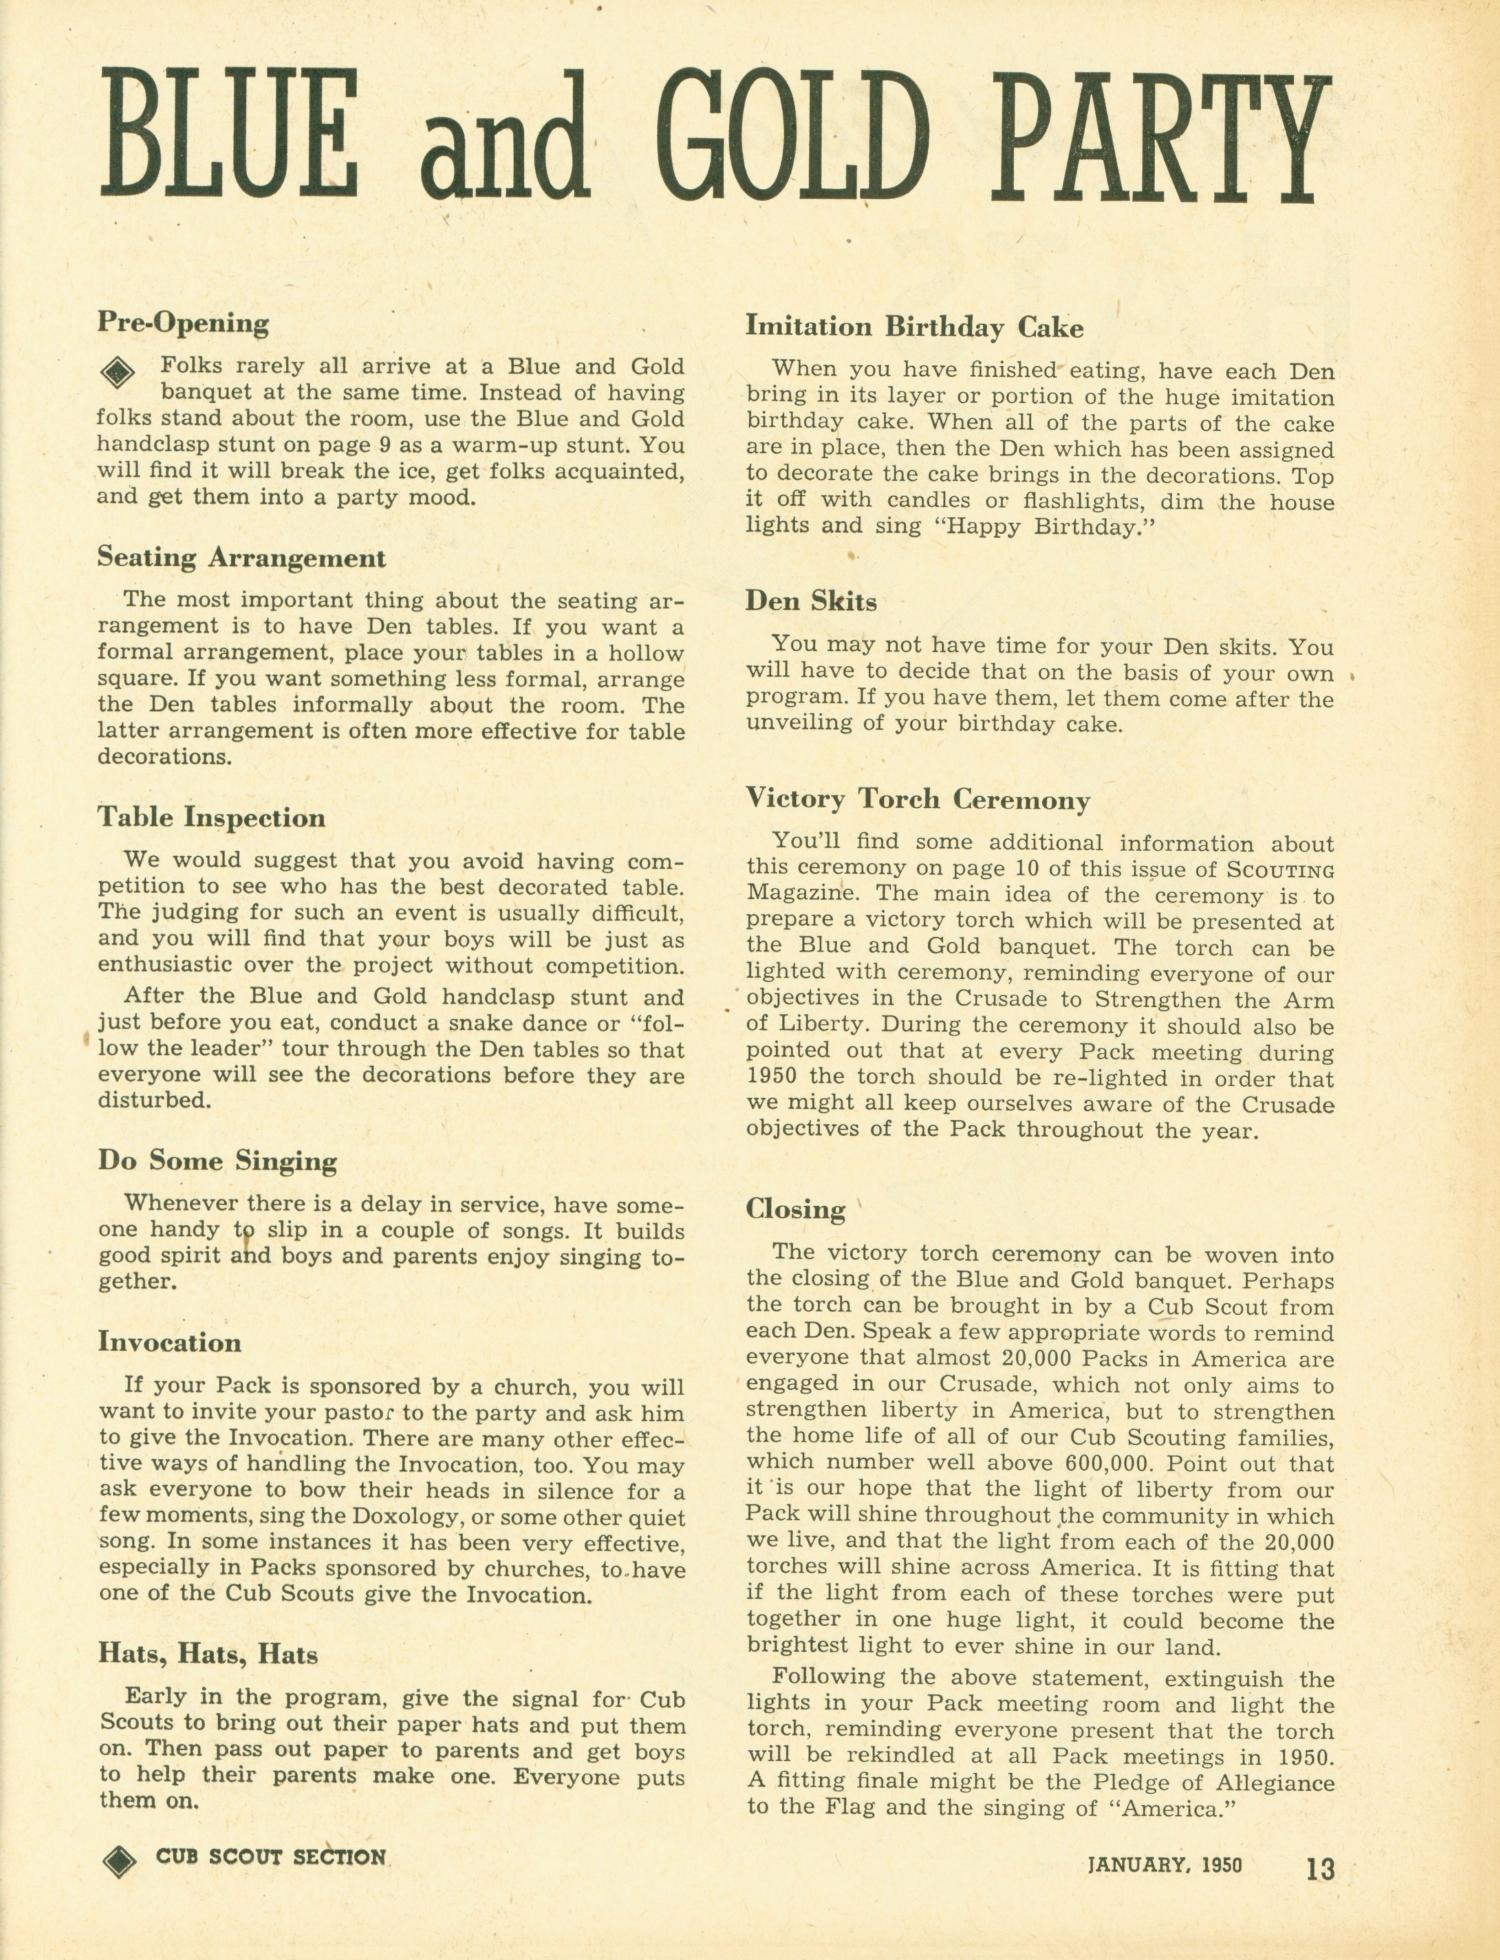 Scouting, Volume 38, Number 1, January 1950
                                                
                                                    13
                                                